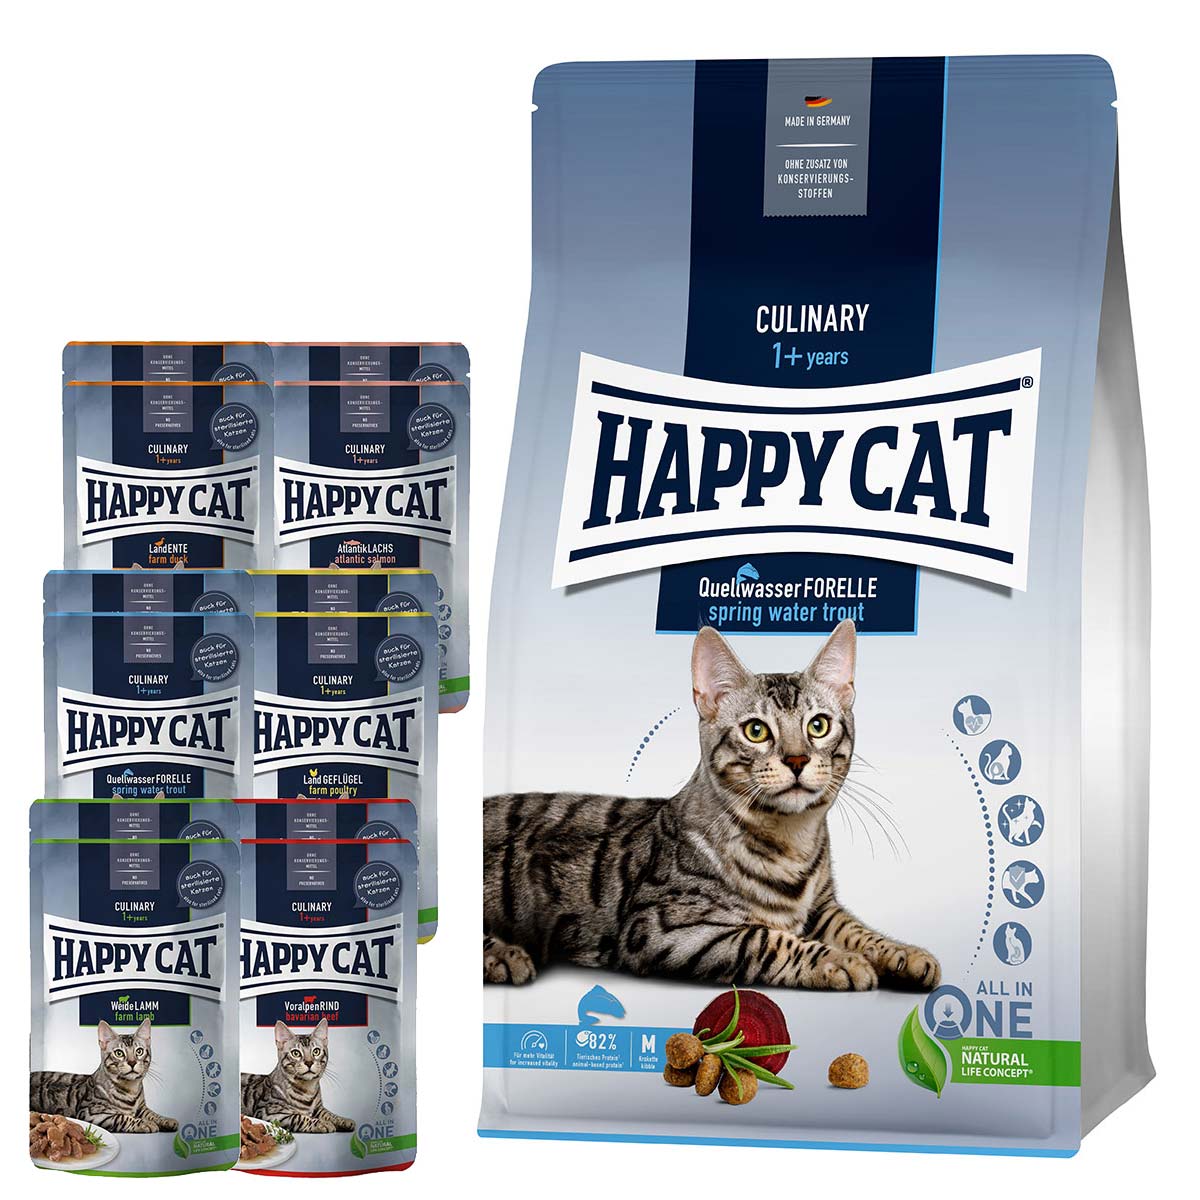 Happy Cat Culinary Adult Quellwasser Forelle 10 kg + Mischtray 1 Happy Cat Pouches 12x85g gratis